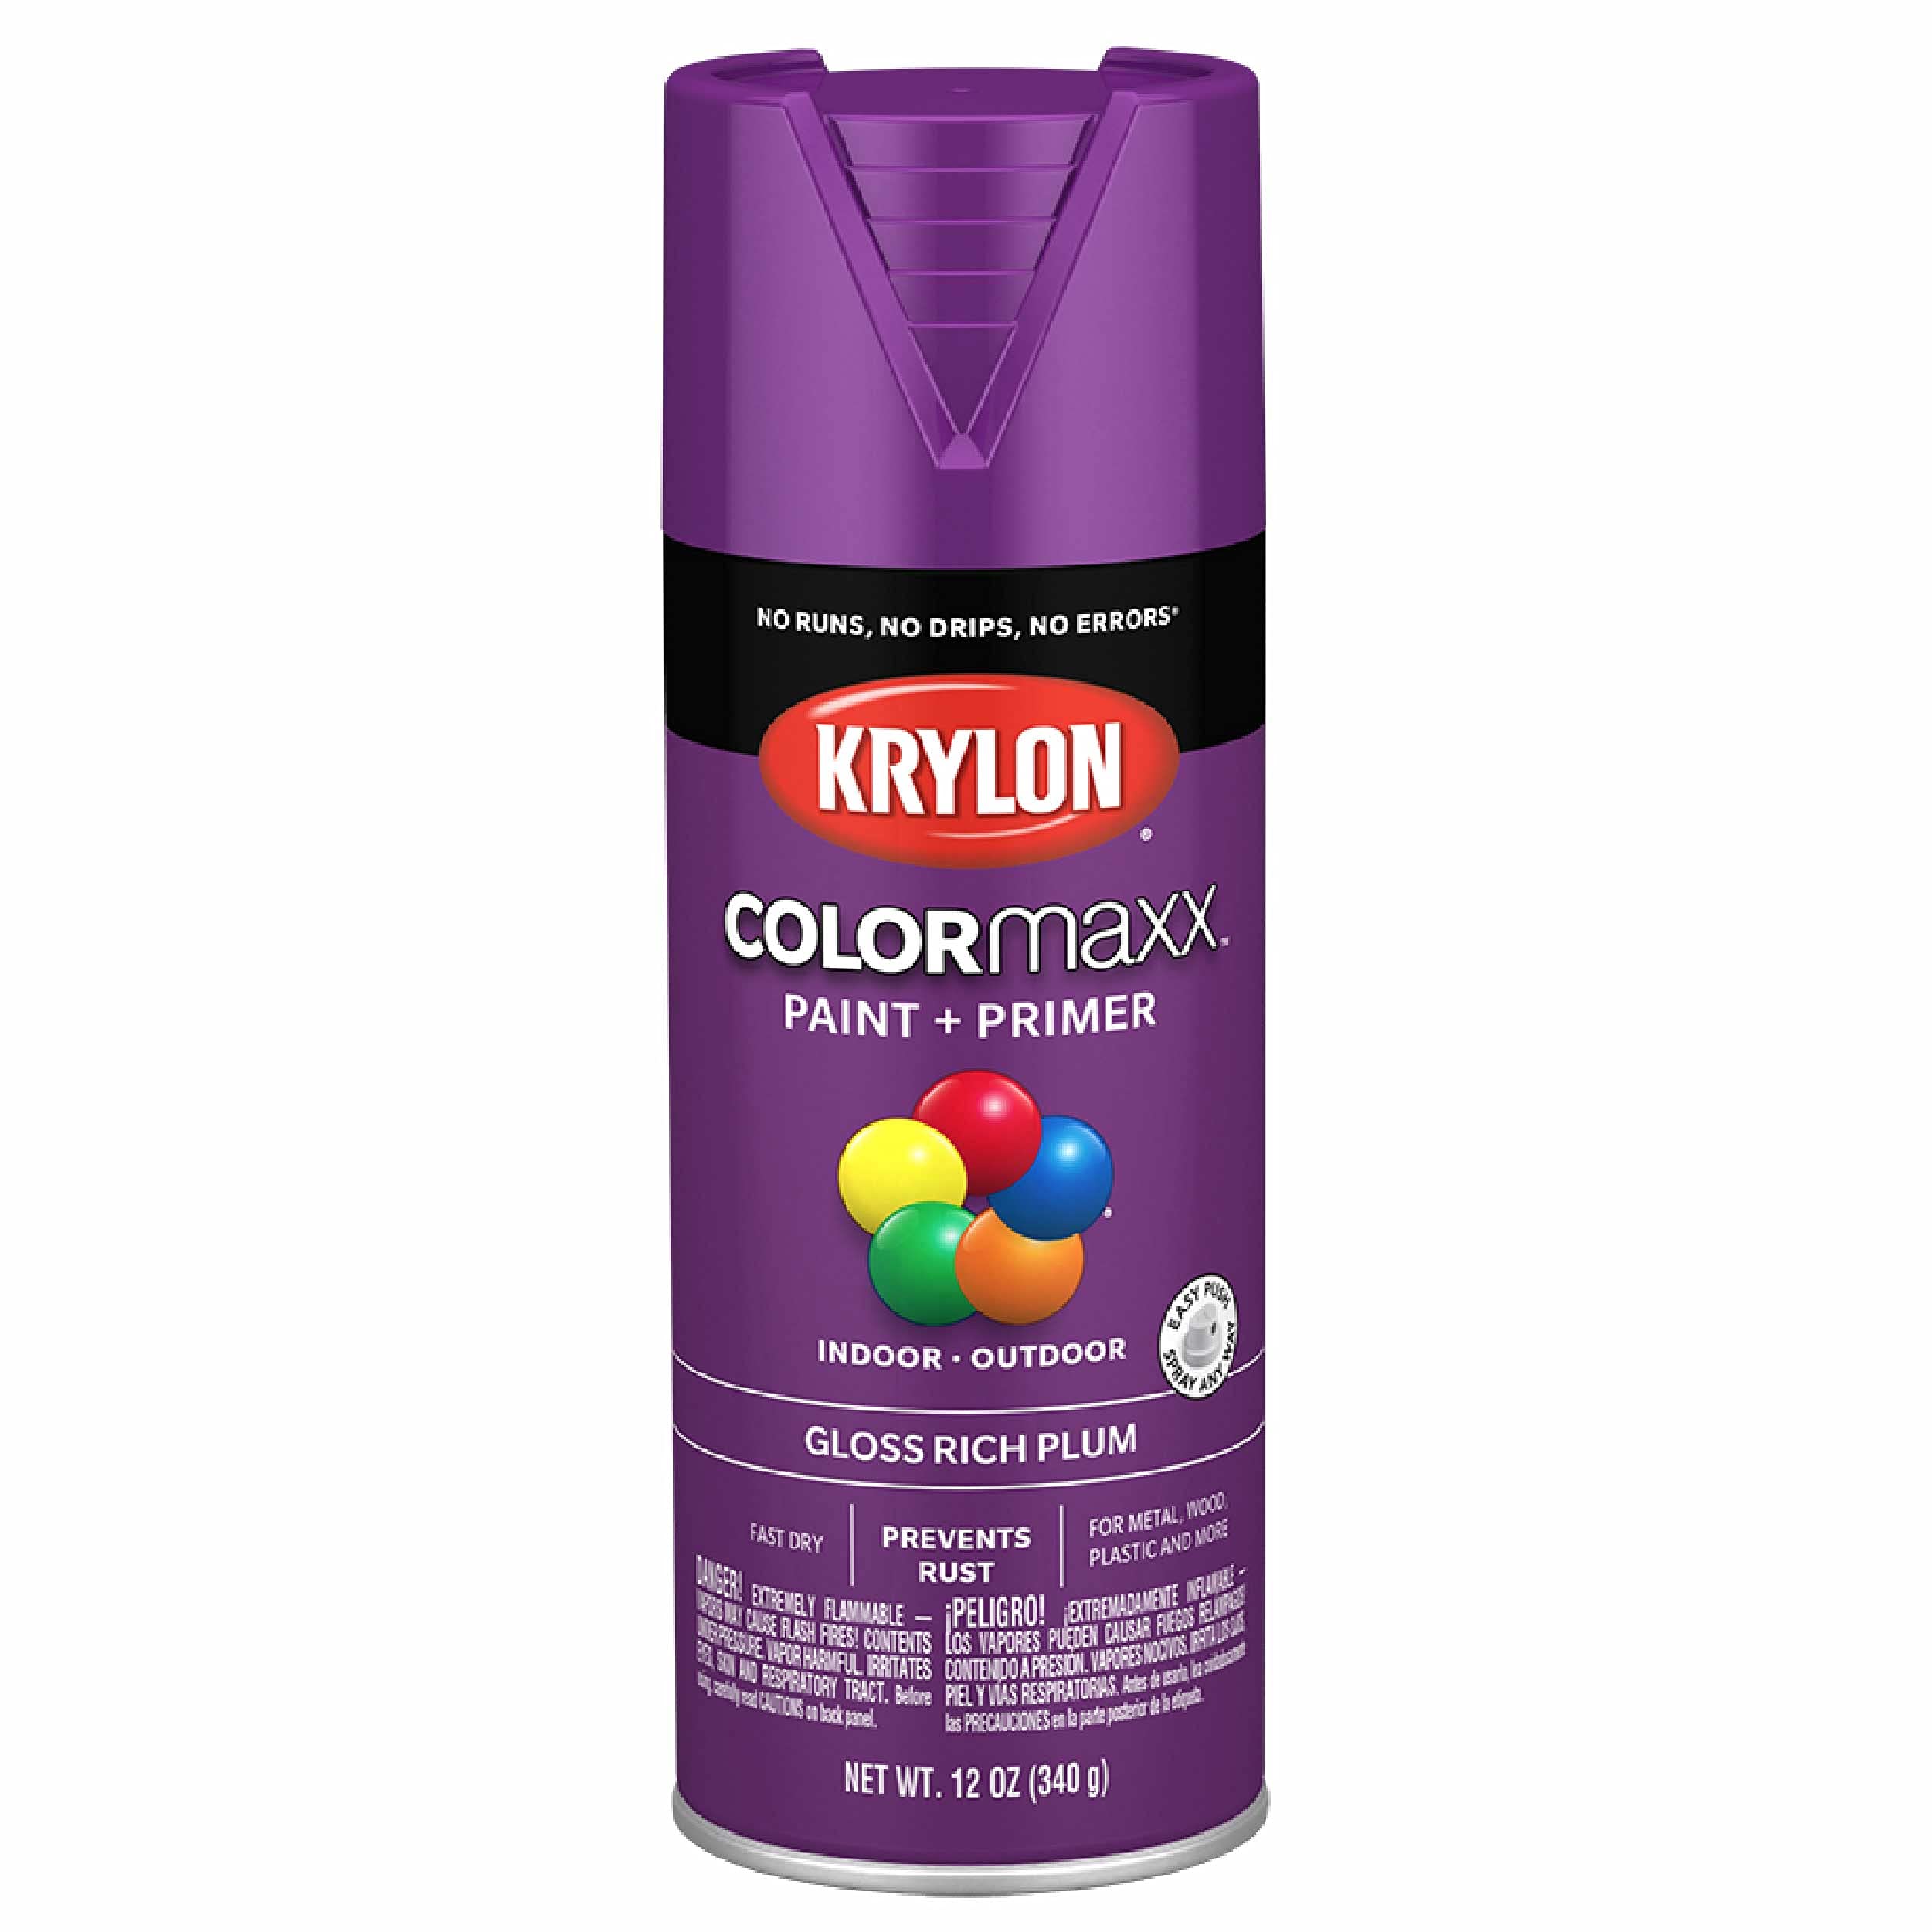 12-Oz Krylon COLORmaxx Indoor/Outdoor Spray Paint and Primer (Gloss Rich Plum, K05536007) $2.10 + Free Shipping w/ Prime or on $25+